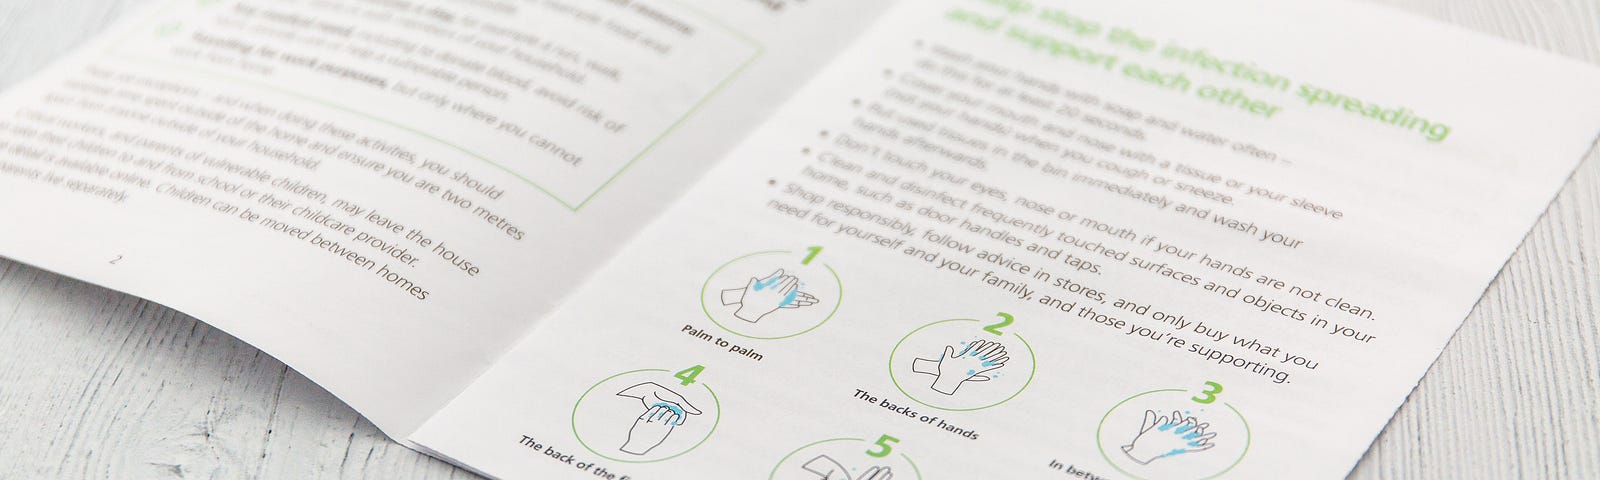 Booklet showing six detailed steps for proper hand washing.